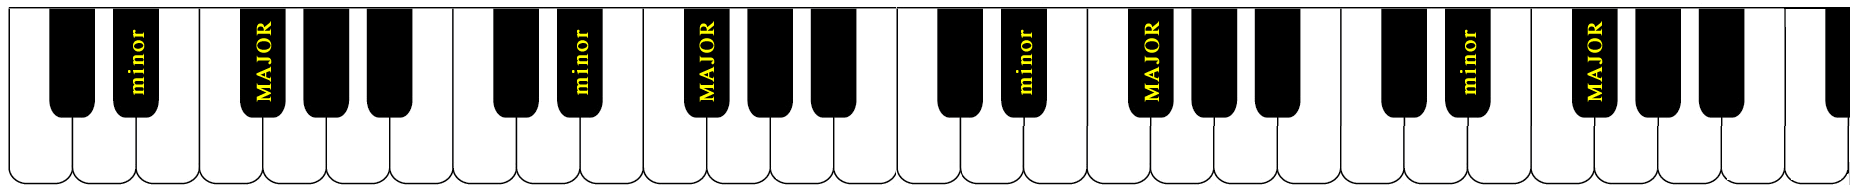 2 pentatonic scales (minor and MAJOR) among the 5 possible black-note scales